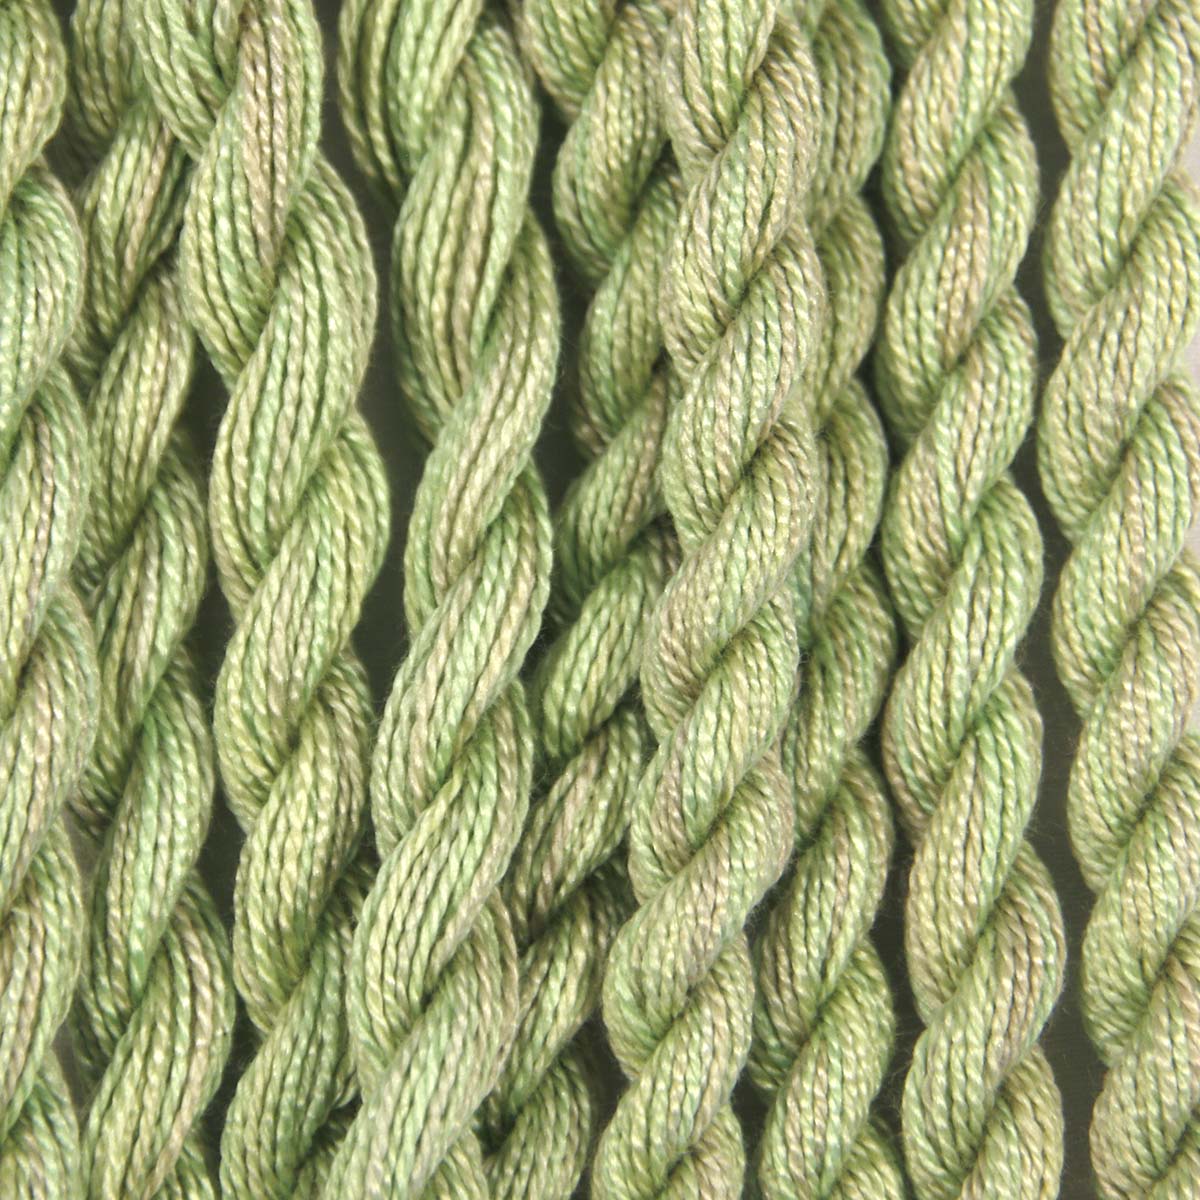 www.colourstreams.com.au Colour Streams Hand Dyed Cotton Threads Cotto Strands Slow Stitch Embroidery Textile Arts Fibre Straw DL 58 New Leaf  Greens